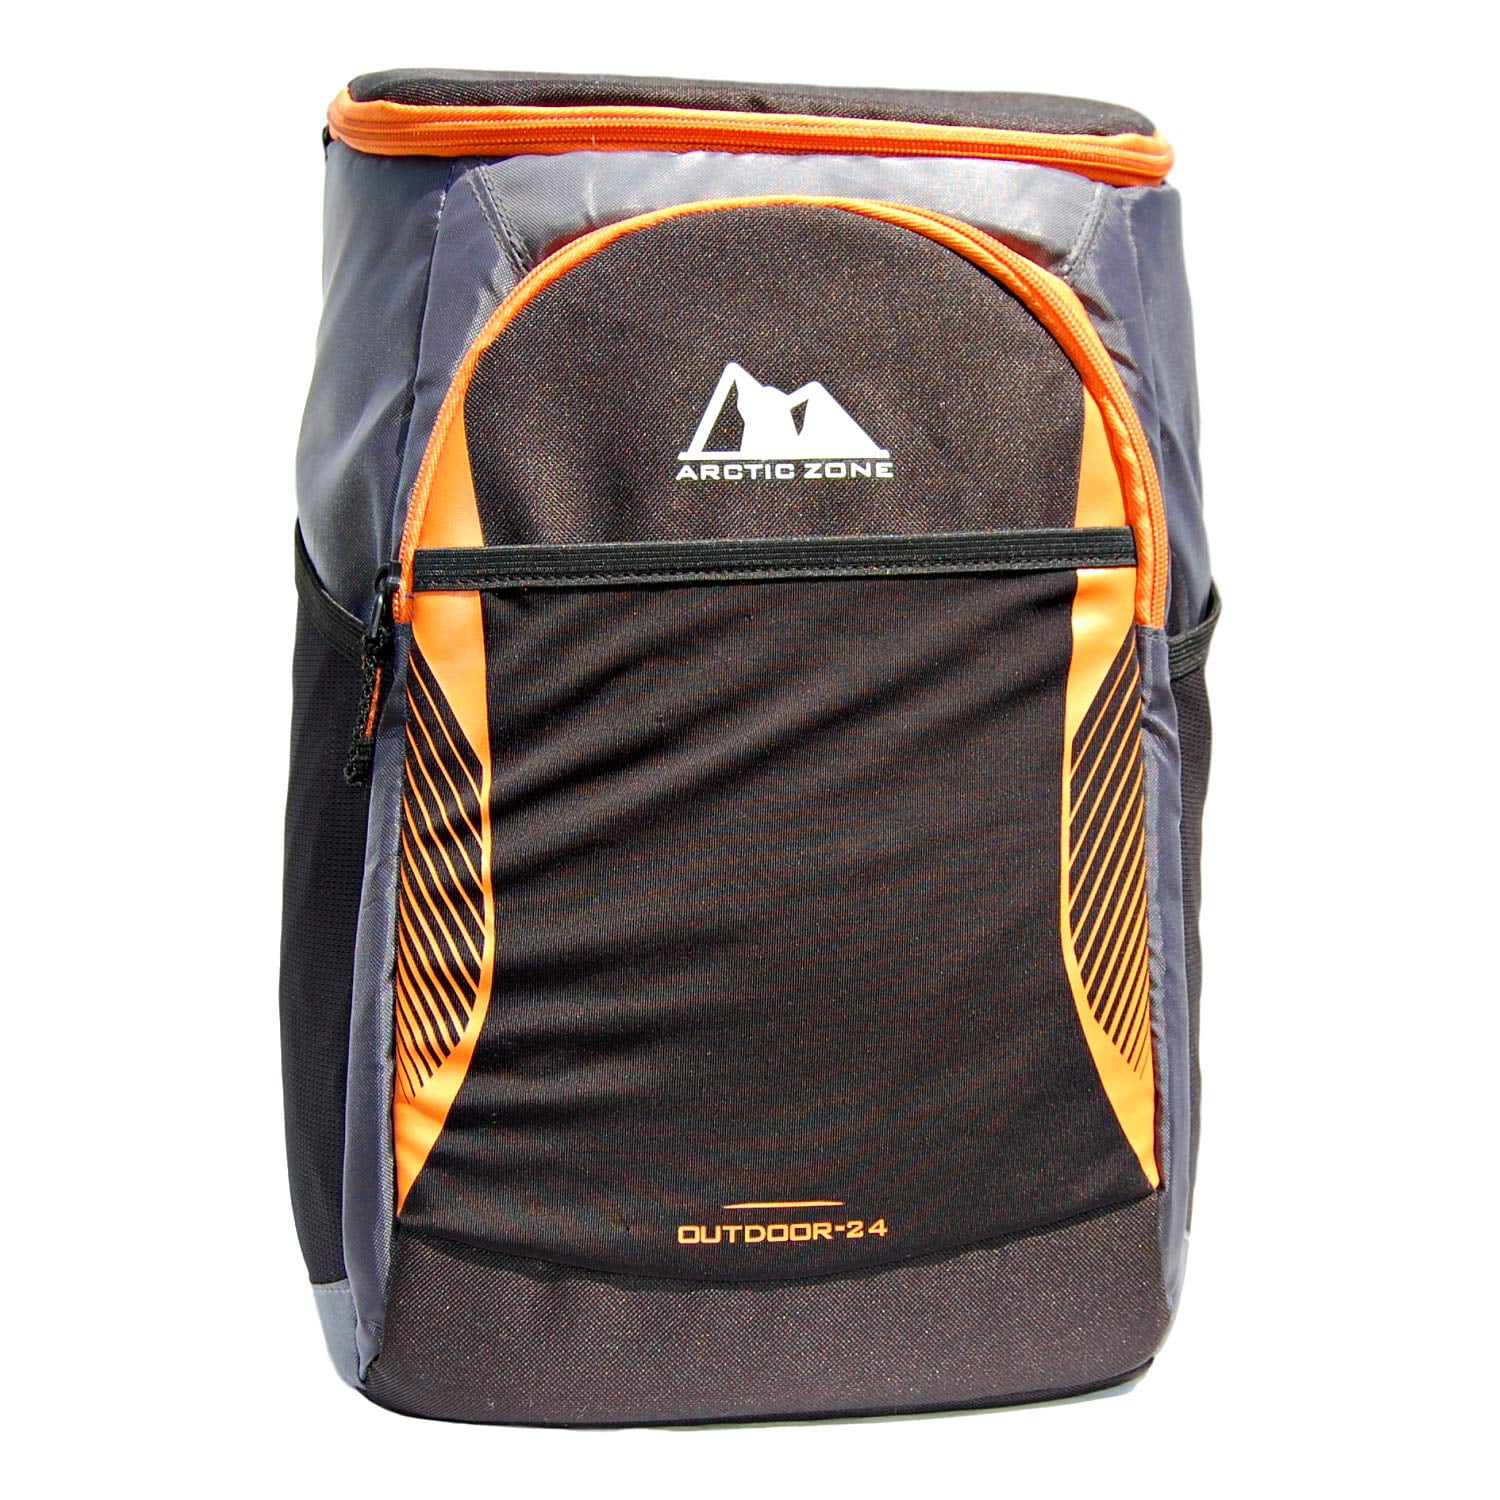 Arctic Zone Backpack Outdoor Cooler 24 Can Capacity, Black and Orange ...